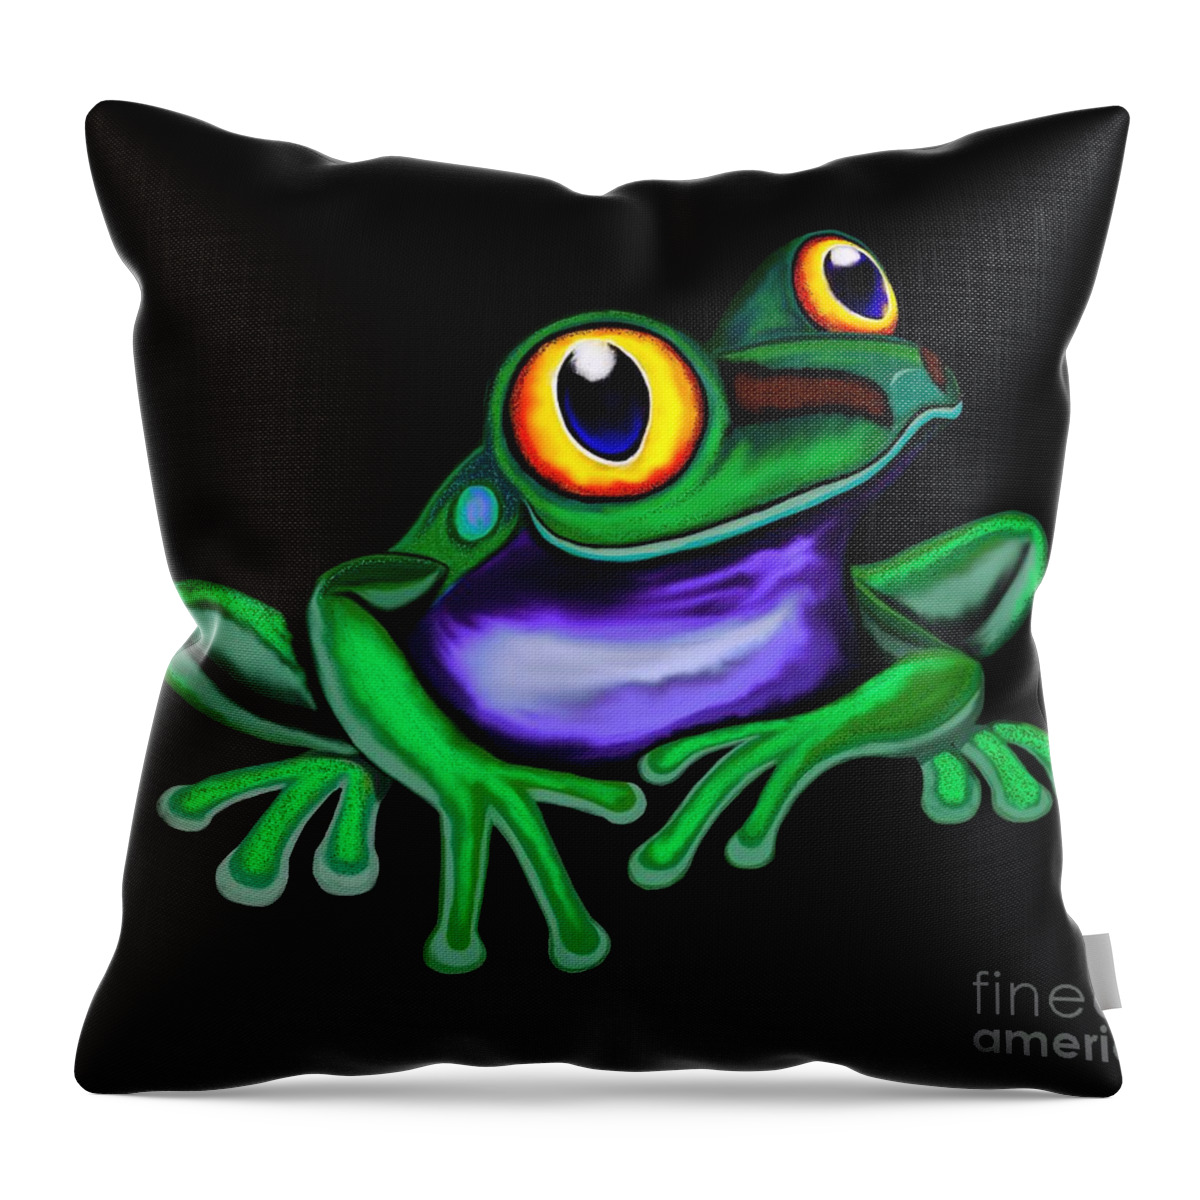 Frog Throw Pillow featuring the digital art Frog Eyes by Nick Gustafson